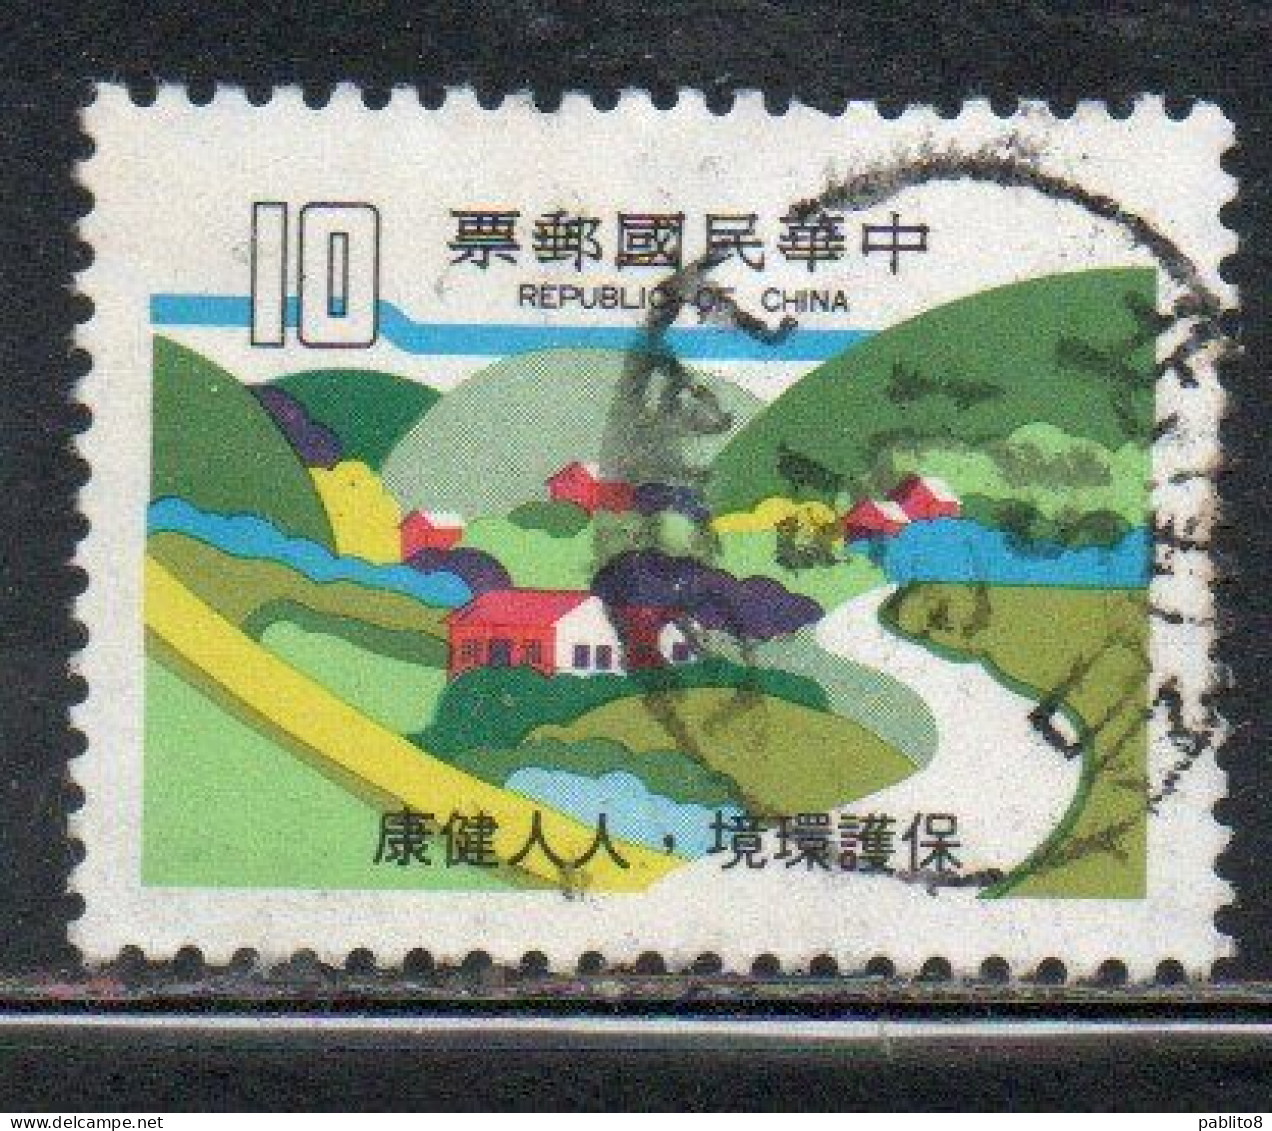 CHINA REPUBLIC CINA TAIWAN FORMOSA 1979 PROTECTION OF THE ENVIRONMENT RURAL LANDSCAPE 10$ USED USATO OBLITERE' - Usados